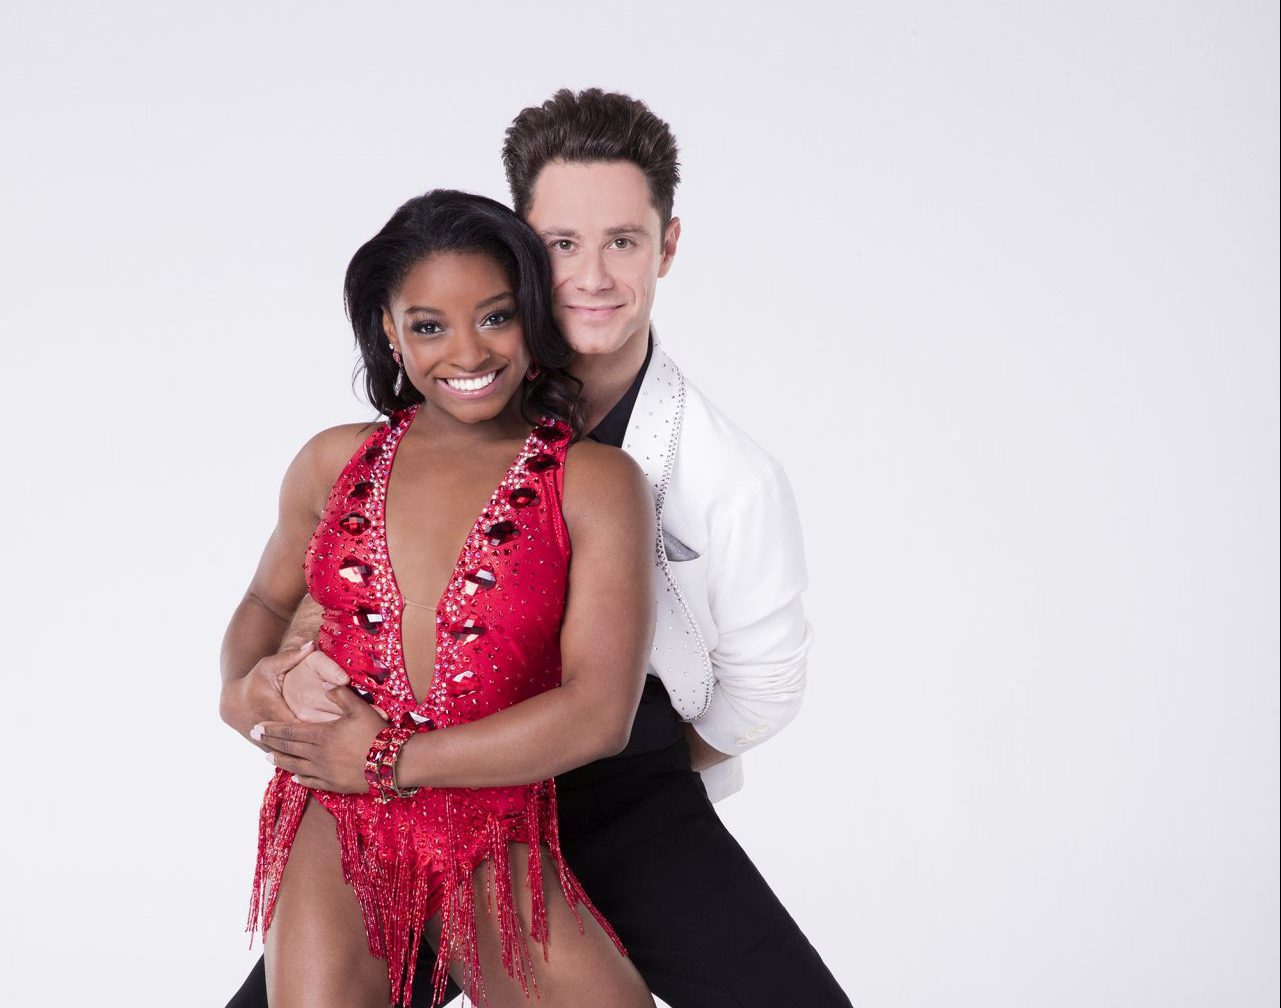 'Dancing With the Stars' season 24: See the hot pairings